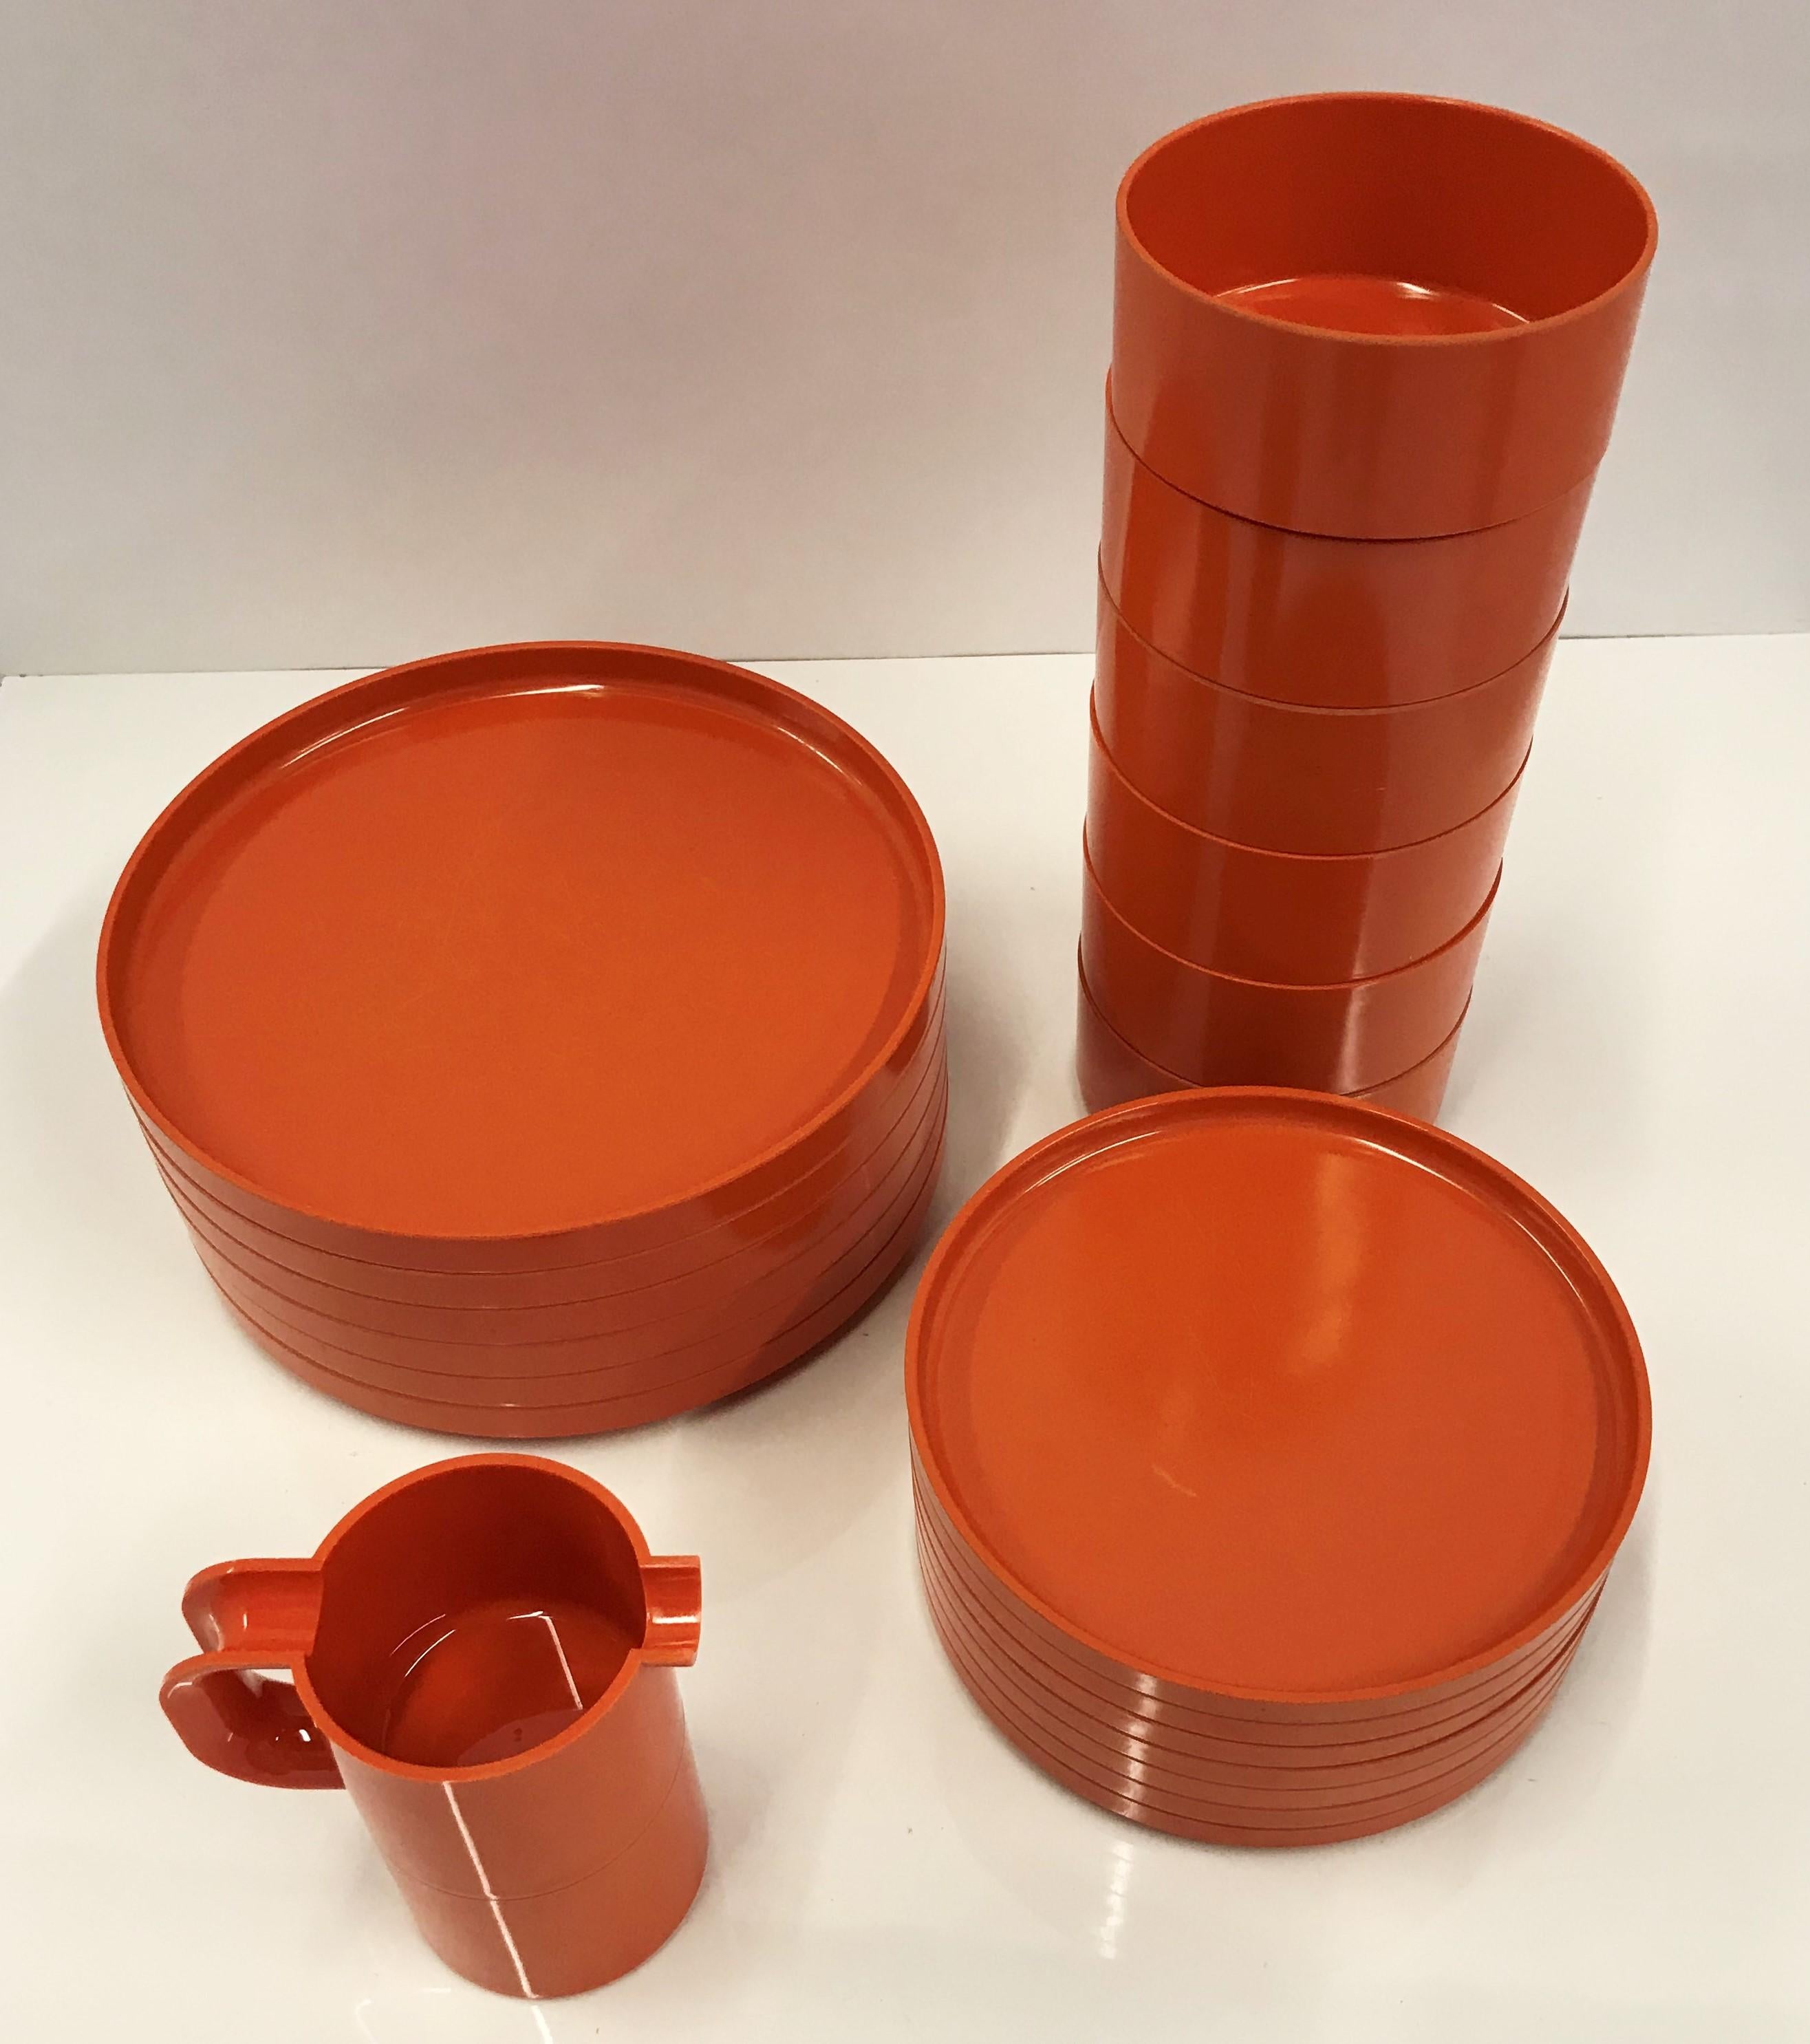 Mid-Century Modern Massimo Vignelli for Heller Set of Max 2 ABS Dinnerware, Italy 1960s - 22 Pieces